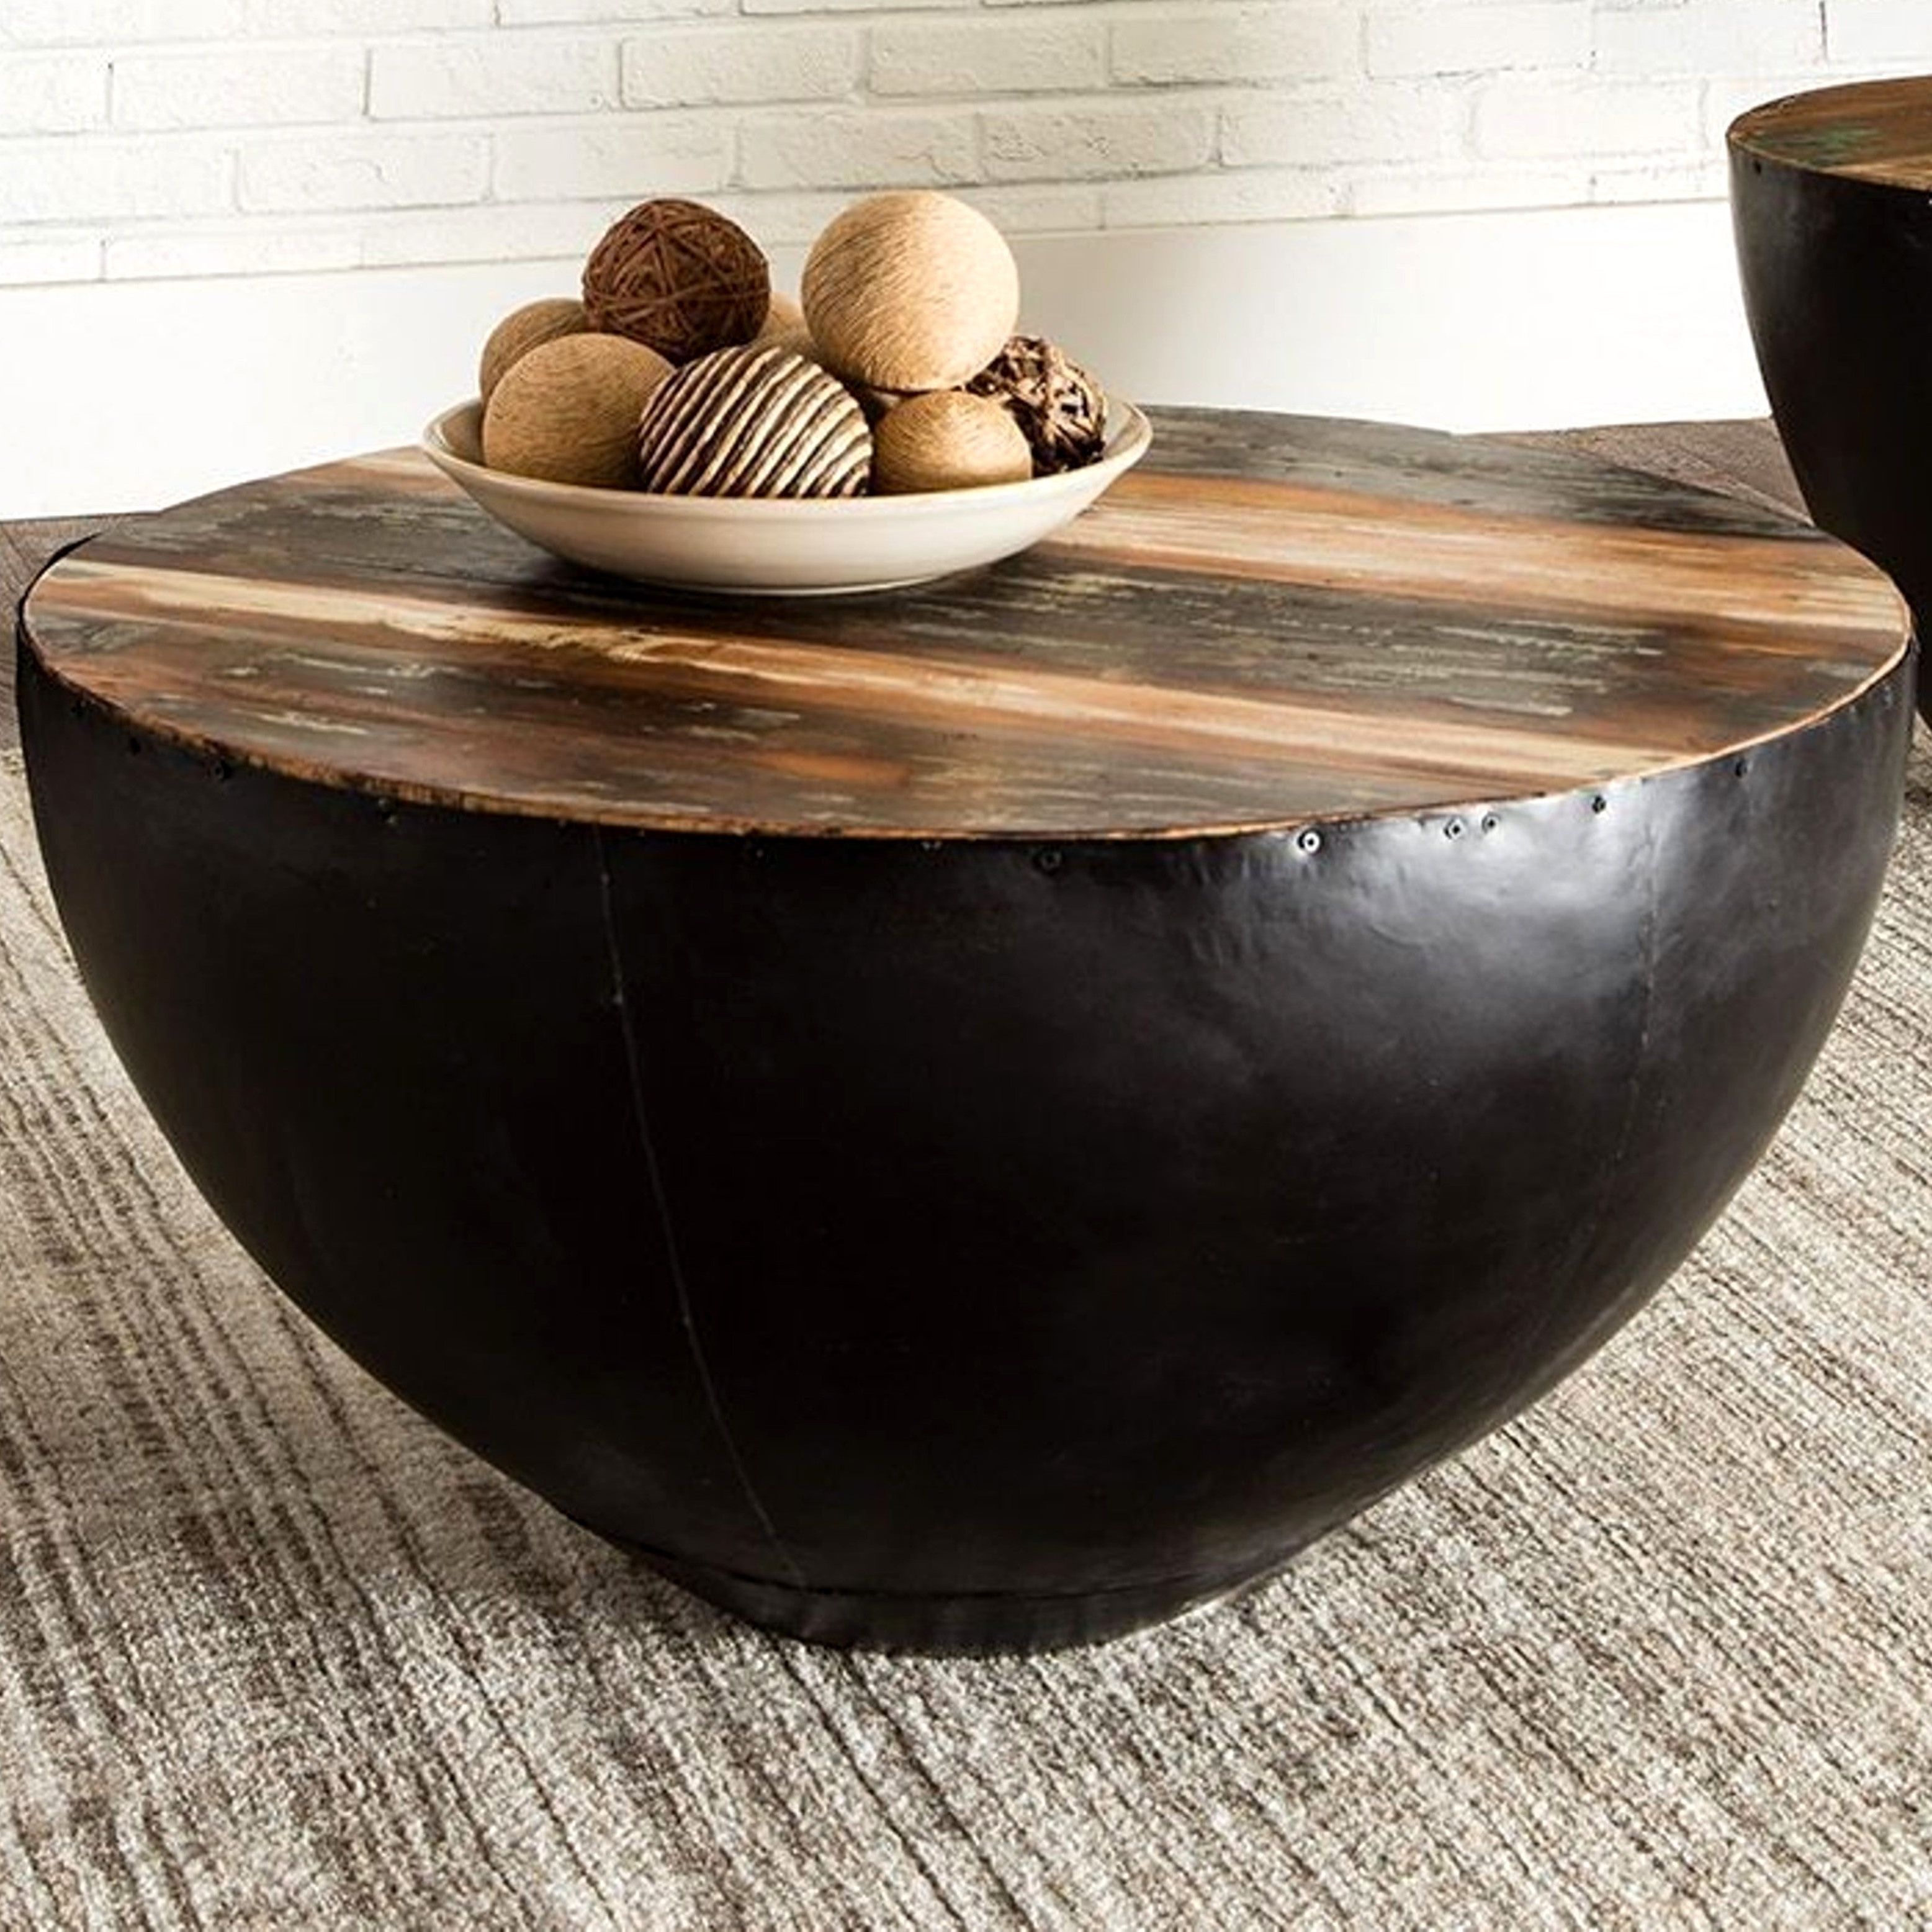 Preferred Adeco Accent Postmodernism Drum Shape Black Metal Coffee Tables Inside Drum Shaped Coffee Table (View 9 of 20)